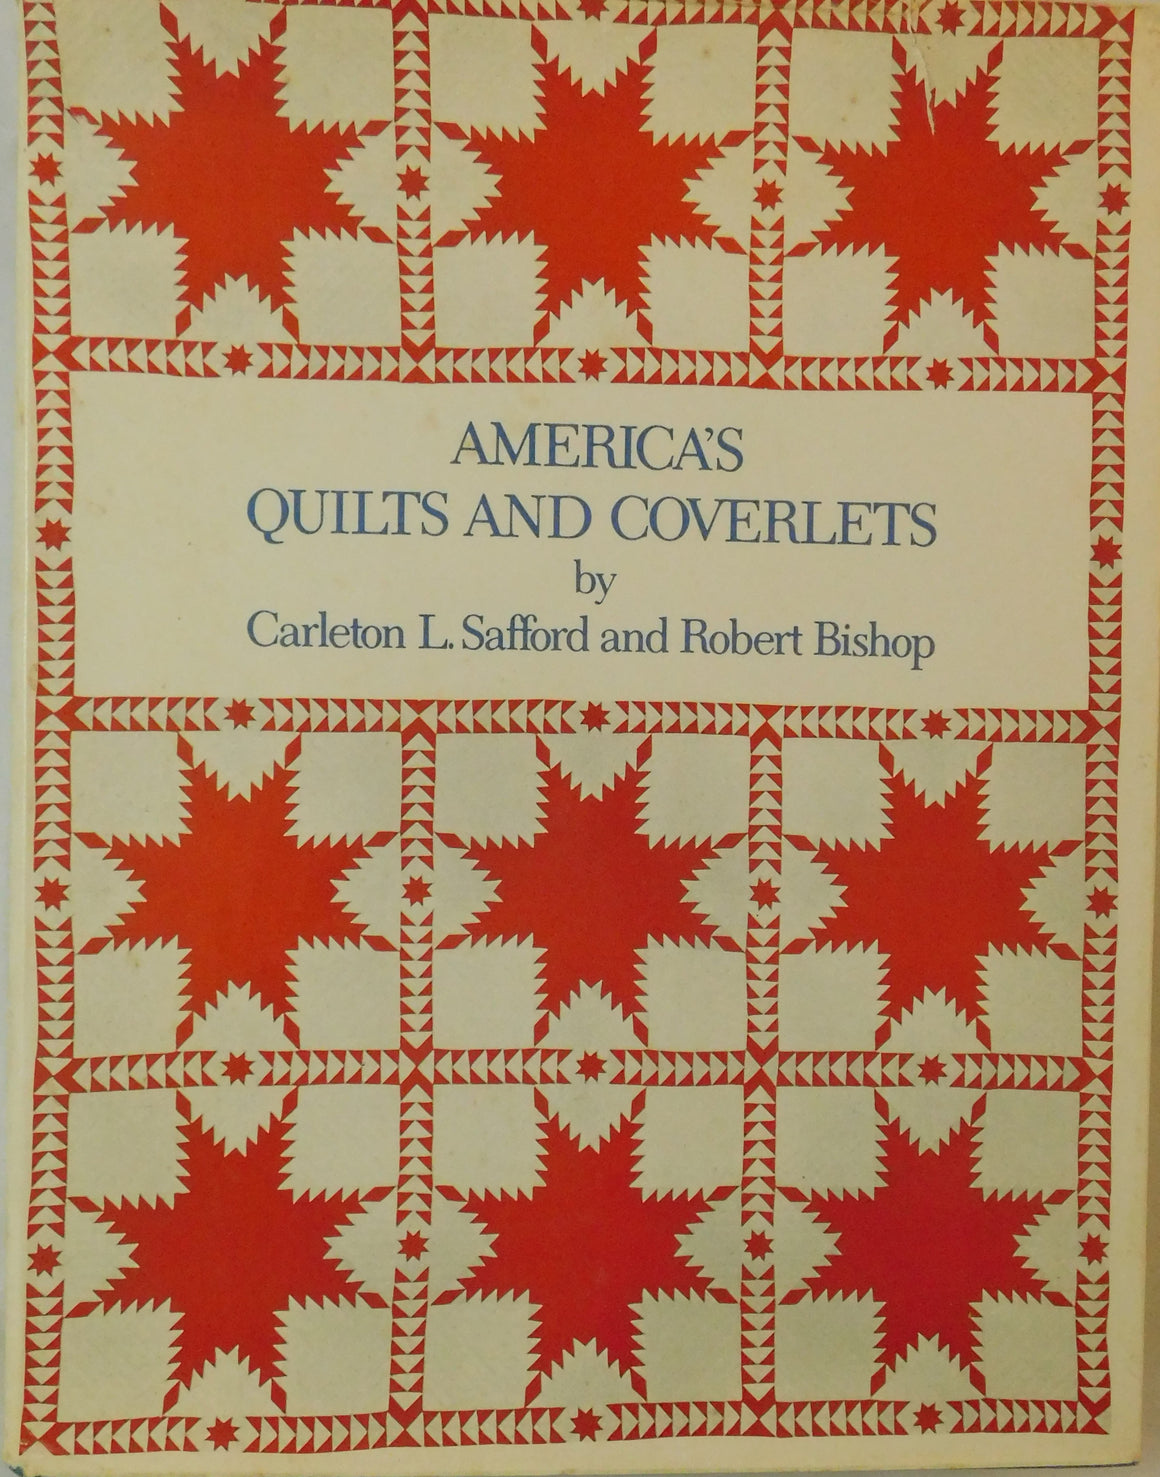 America's Quilts and Coverlets - Used Book